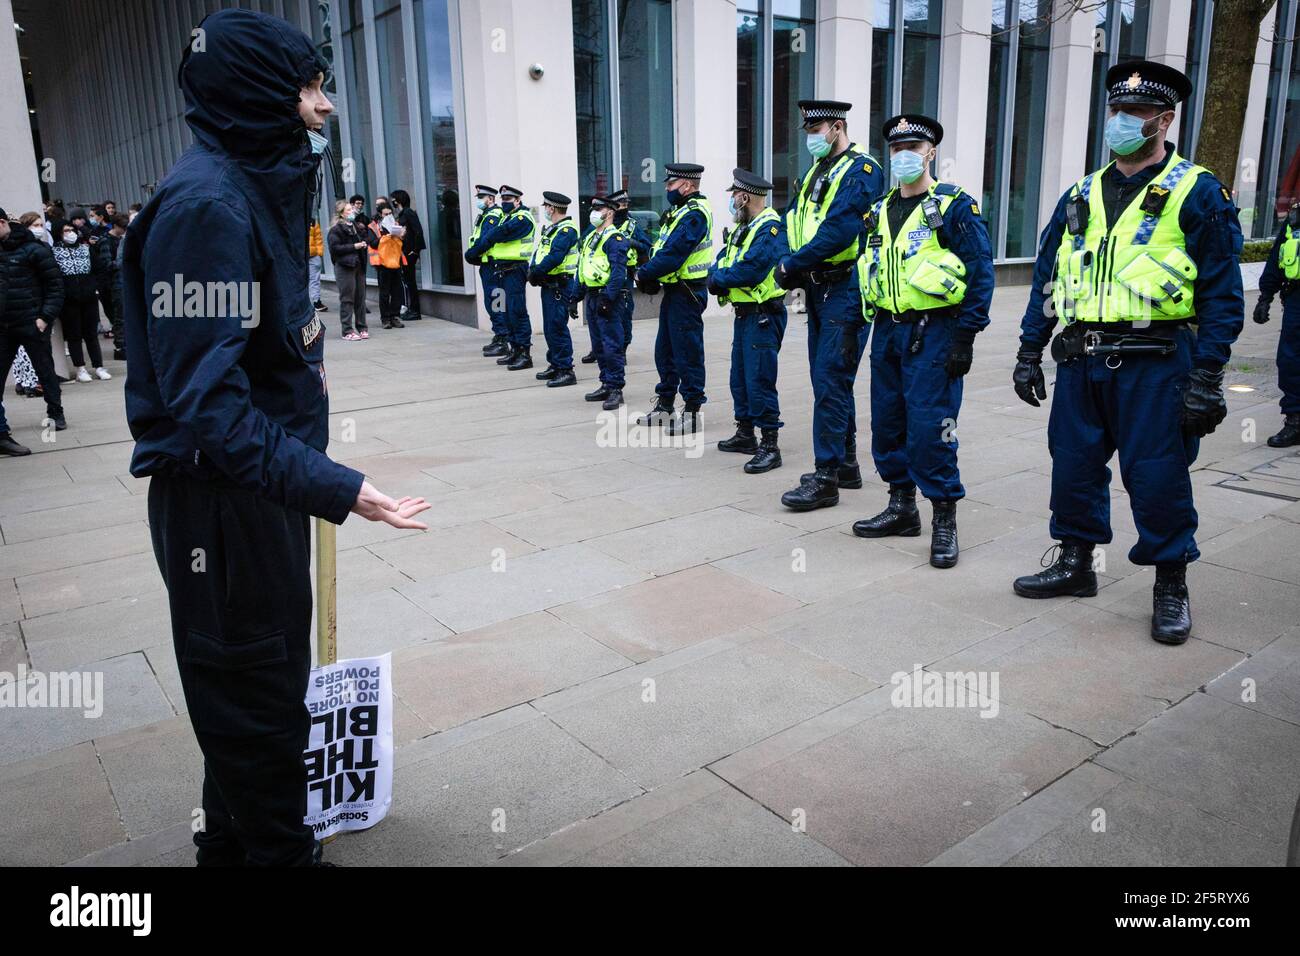 Manchester, UK. 27th Mar, 2021. A protester confronts the police during the demonstration. People come out to the streets to protest against the new policing bill in a 'Kill The Bill demonstration'. The new legislation will give the police more powers to control protests. Credit: SOPA Images Limited/Alamy Live News Stock Photo